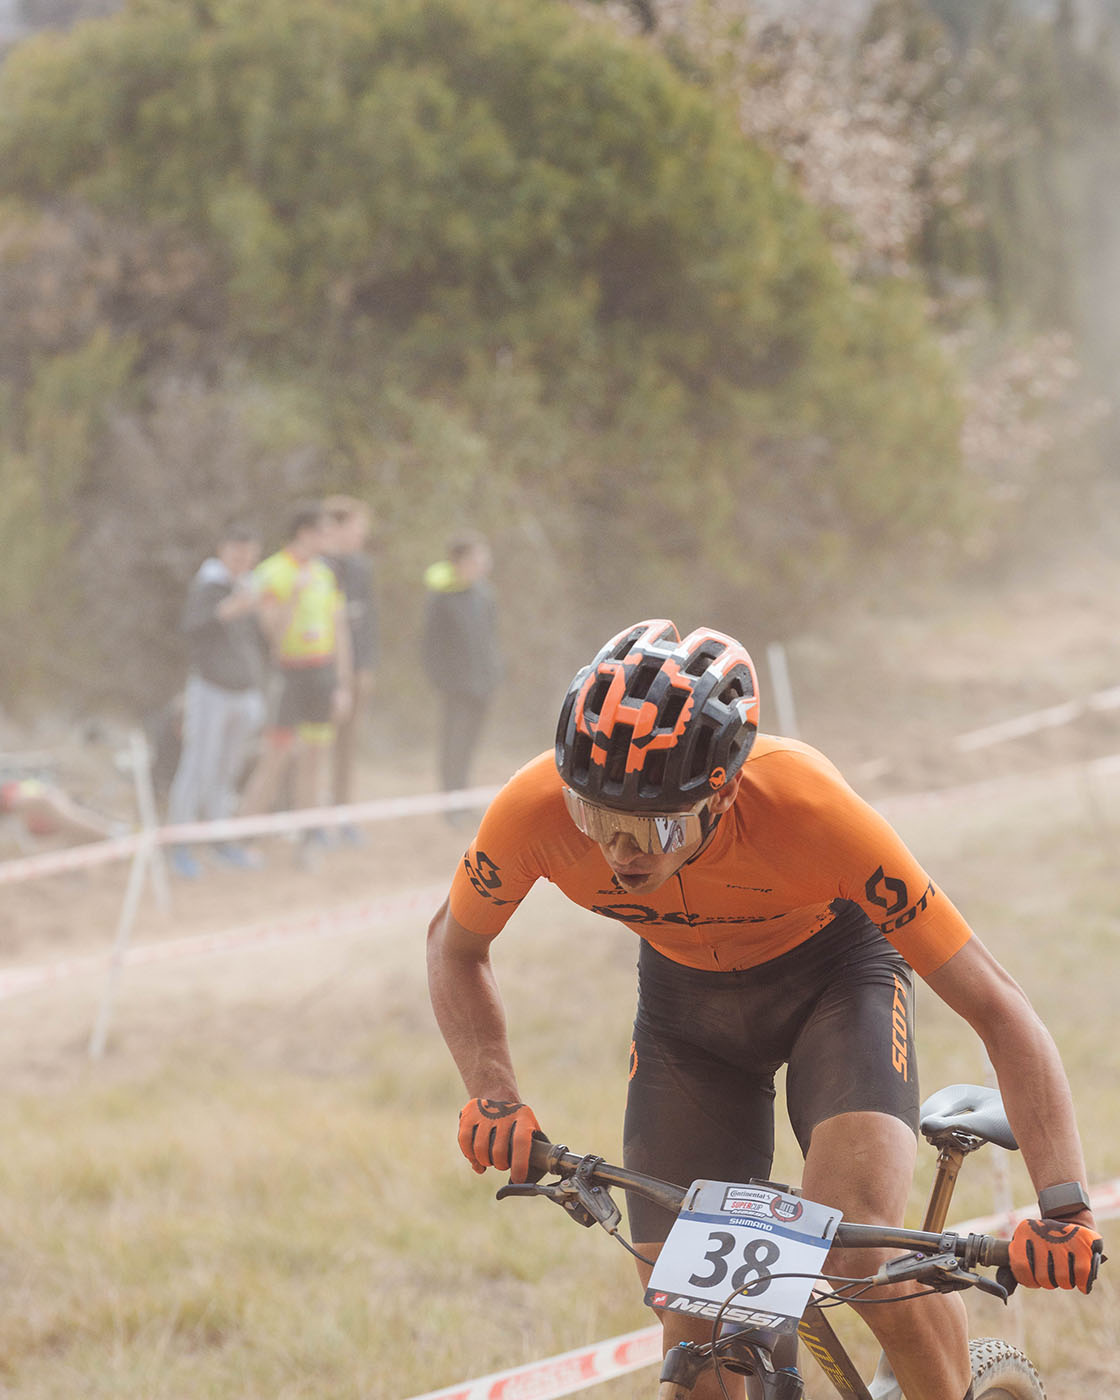 The Orange Seal Off-Road Team in action during the Massi Super Cup in Banyoles